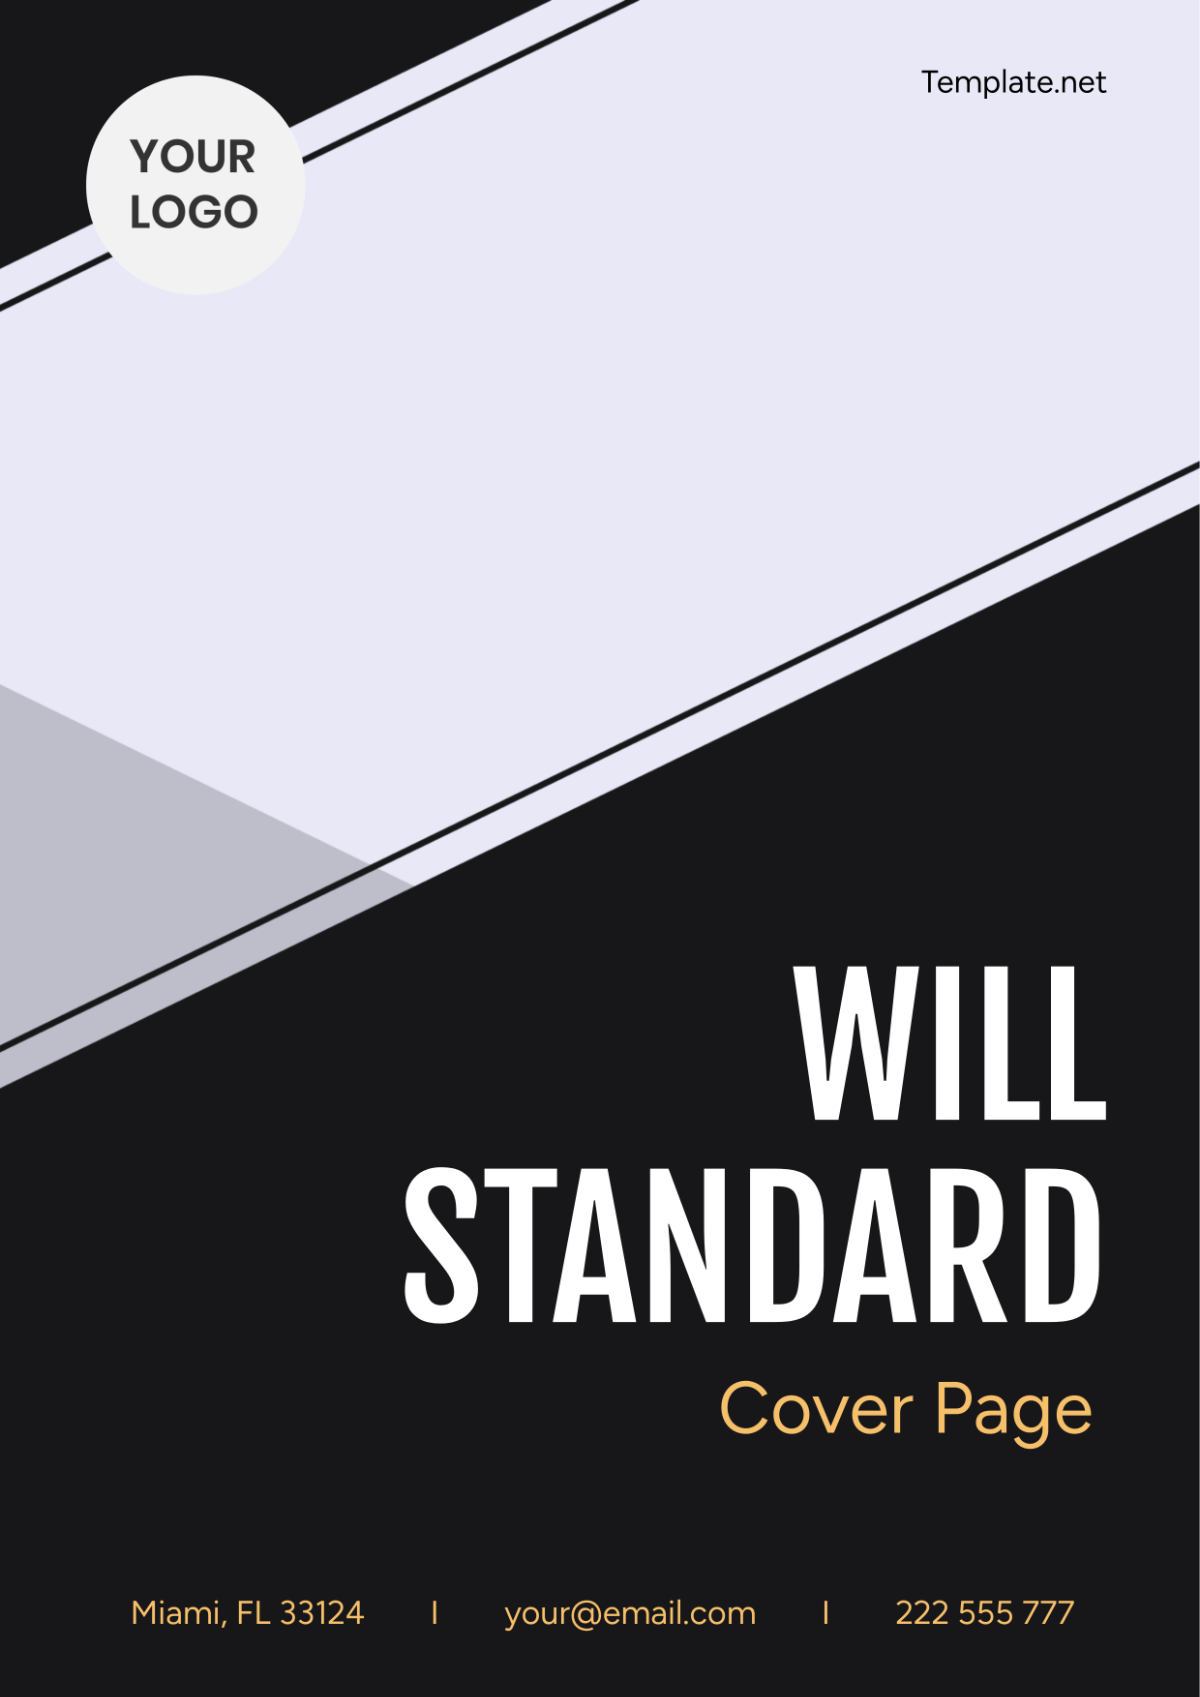 Will Standard Cover Page